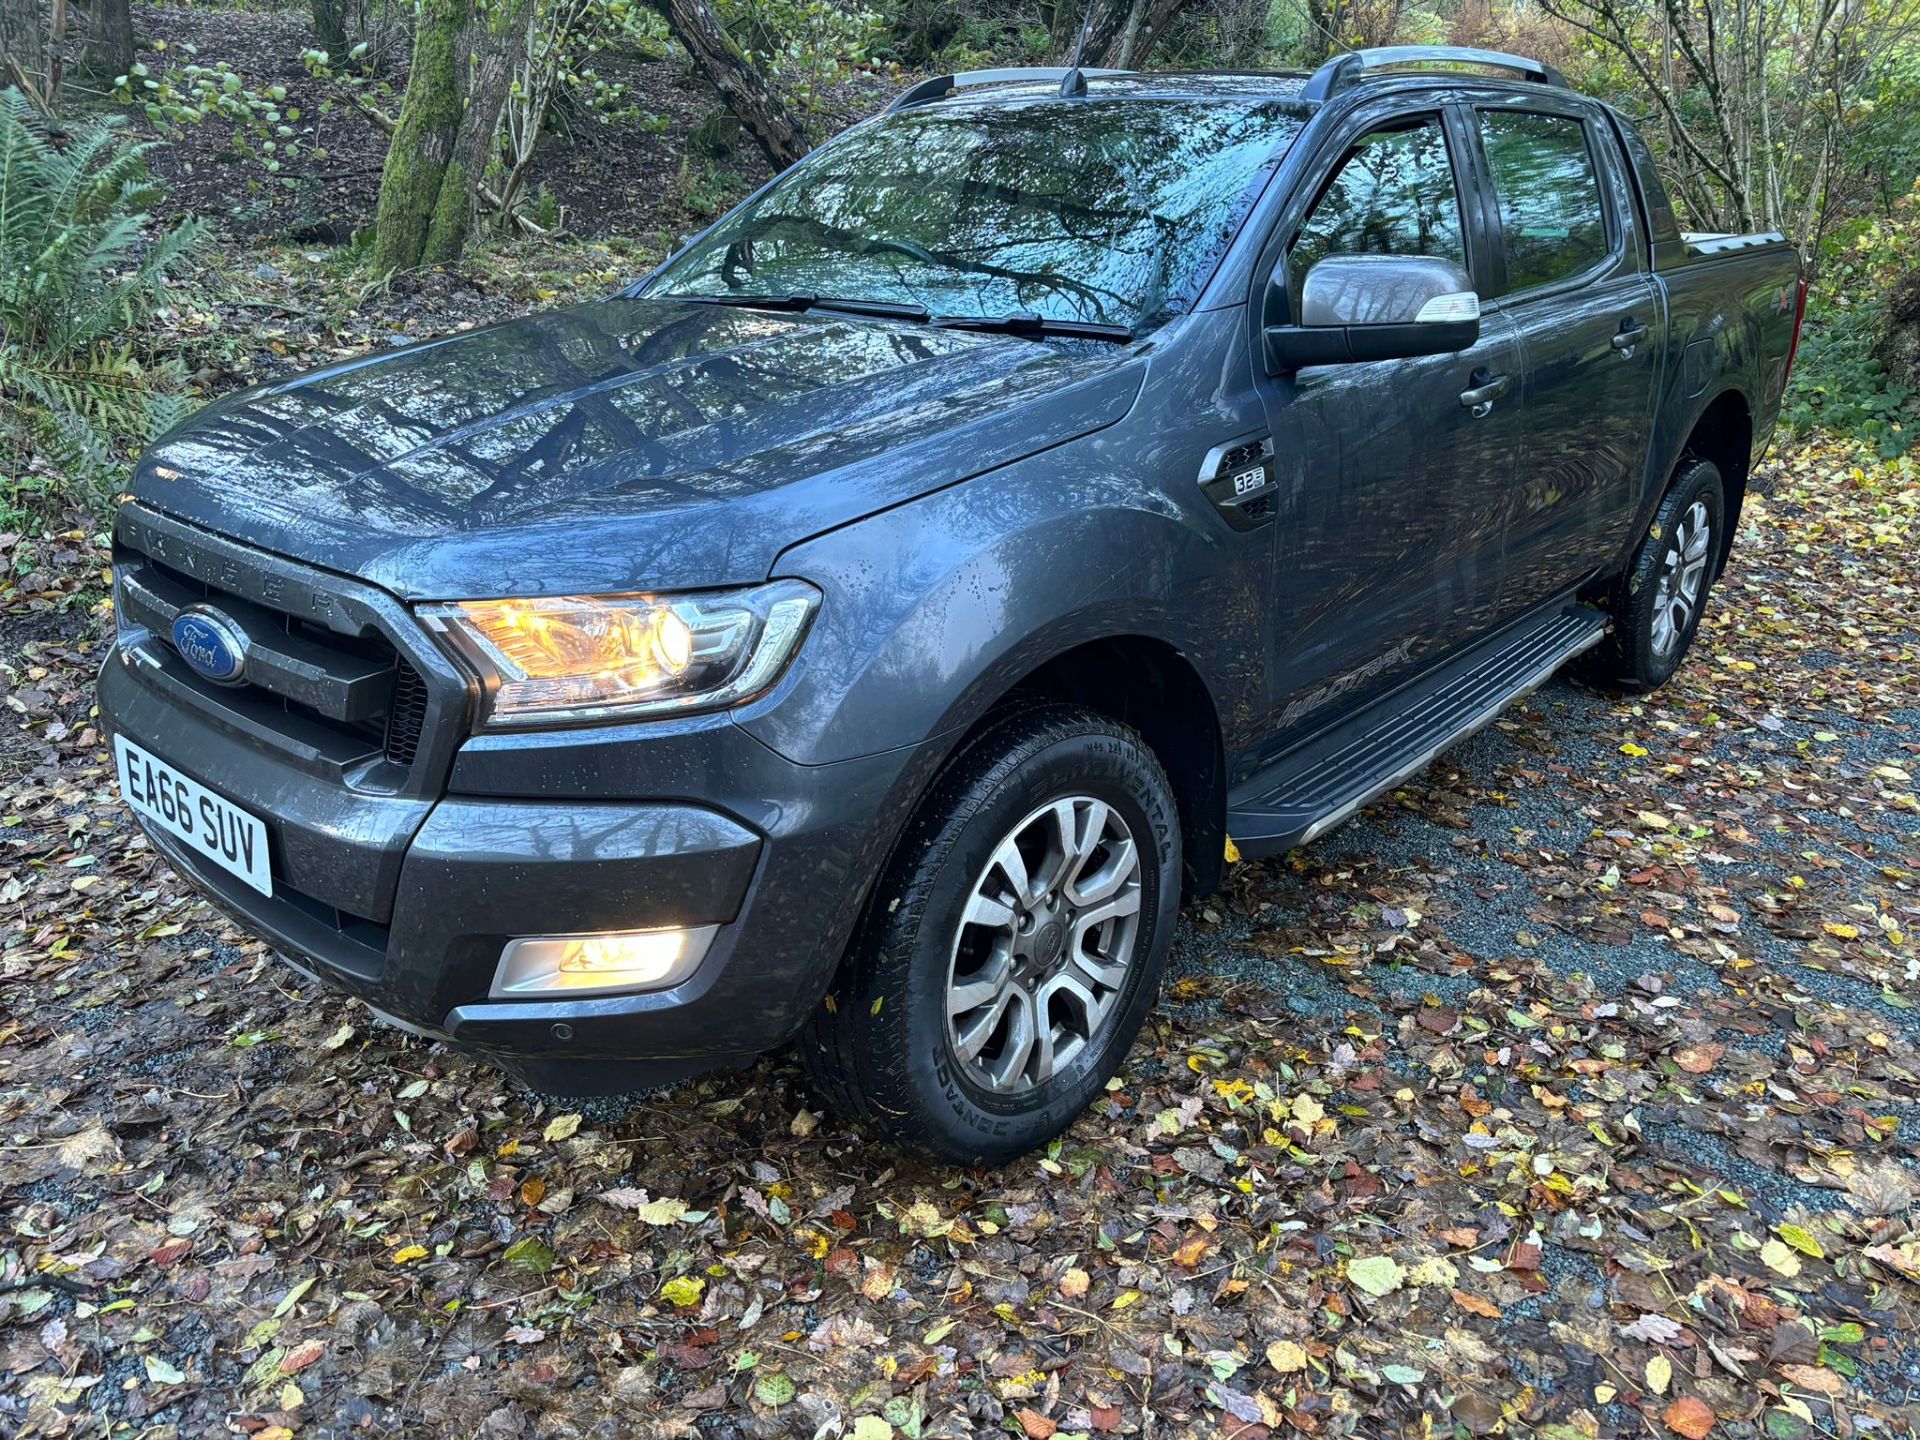 FORD RANGER WILDTRAK 3.2 AUTOMATIC PICKUP TRUCK DOUBLE CAB - Image 7 of 12